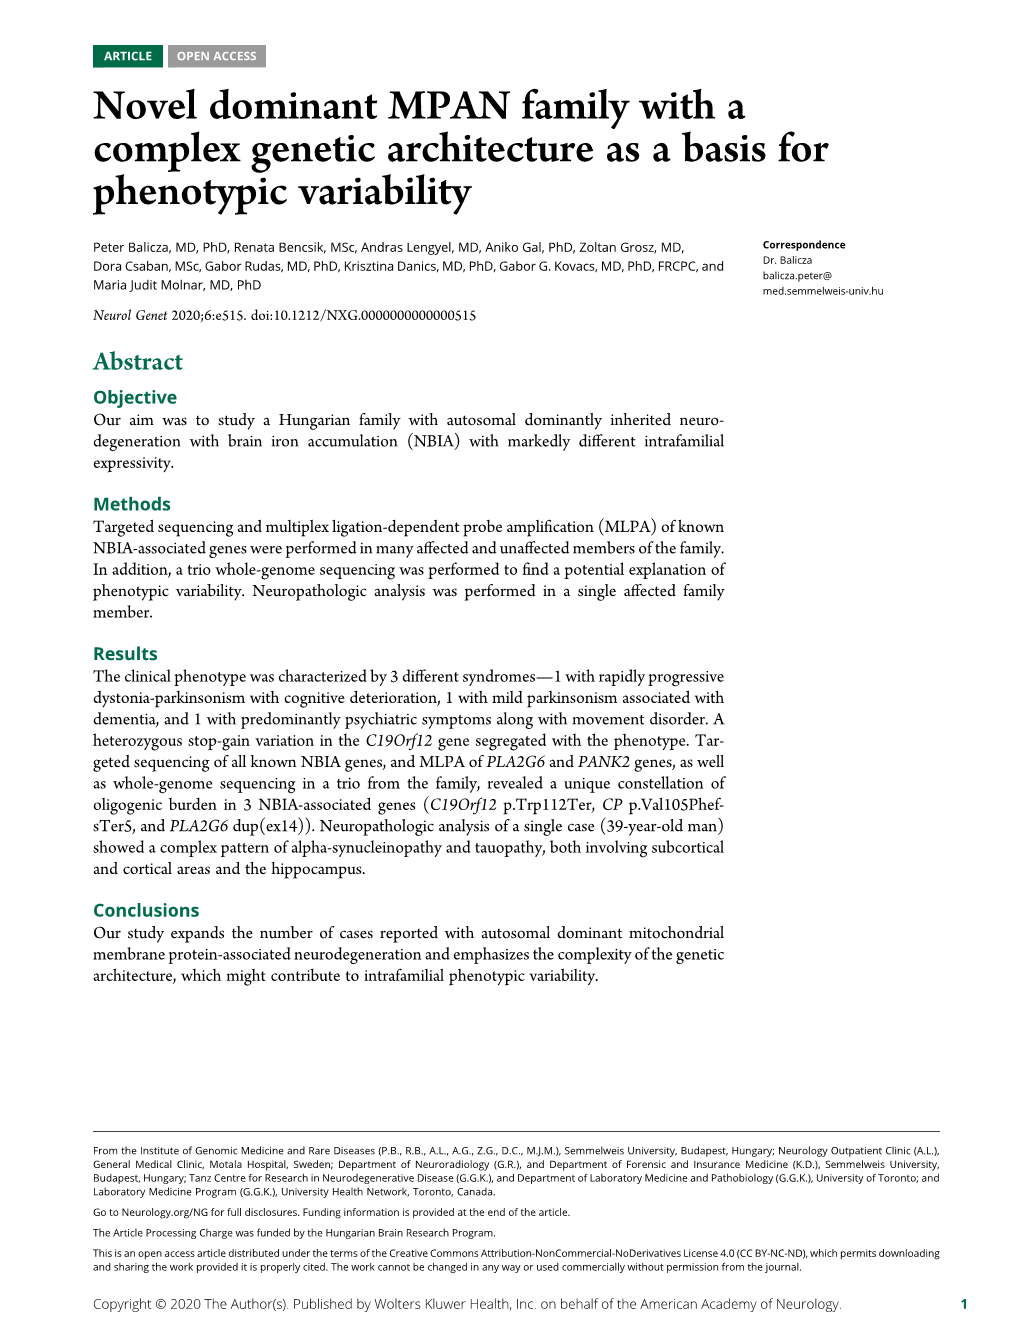 Novel Dominant MPAN Family with a Complex Genetic Architecture As a Basis for Phenotypic Variability